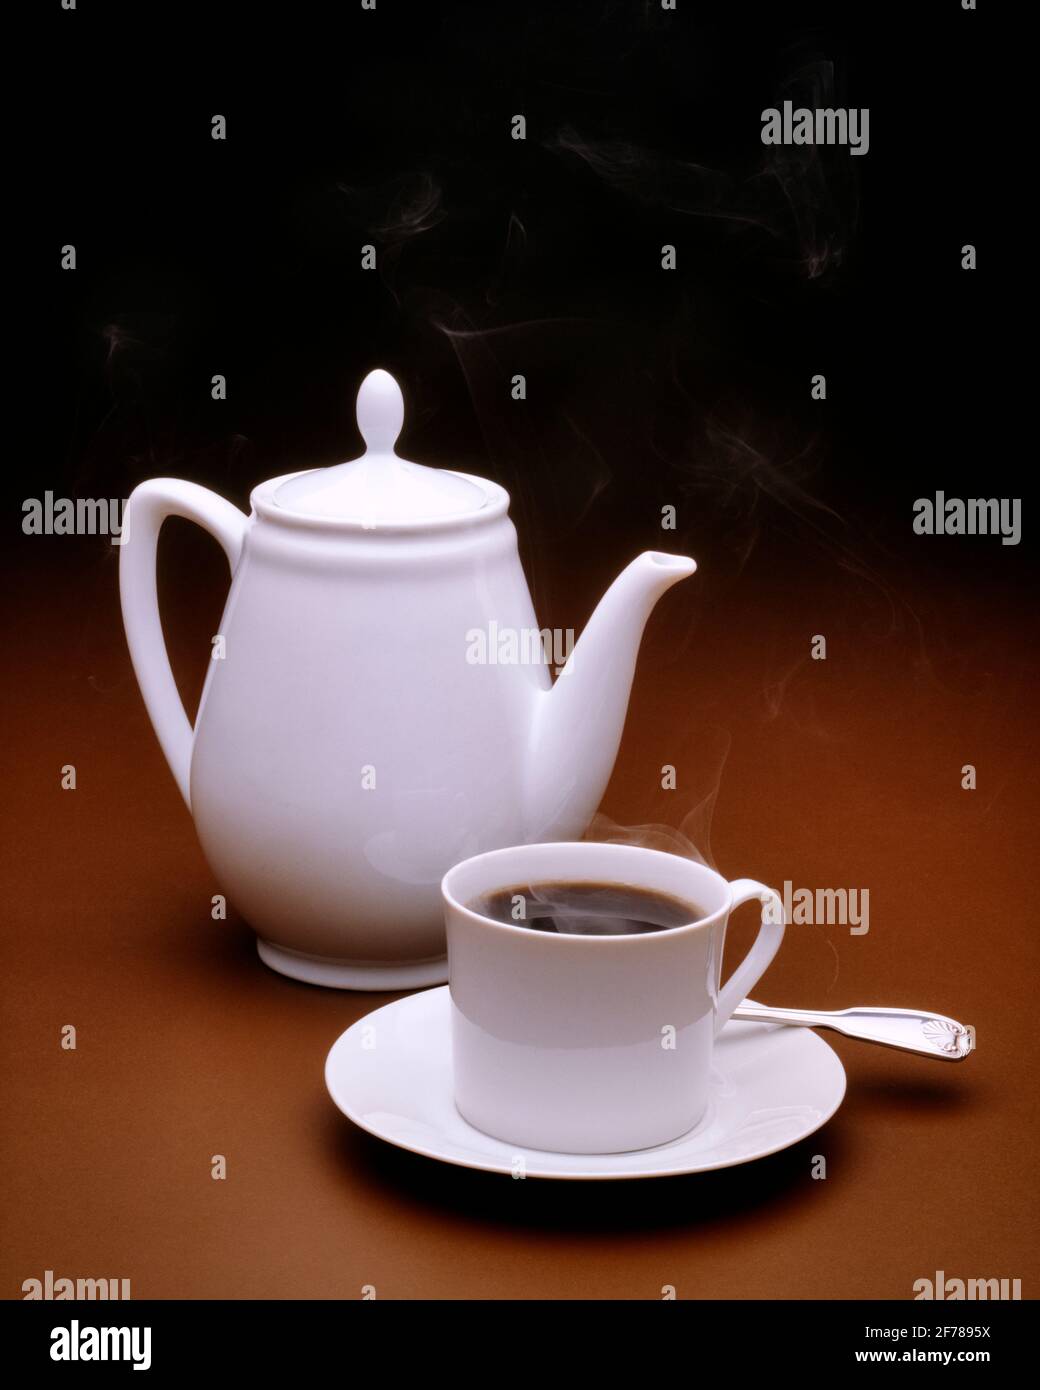 https://c8.alamy.com/comp/2F7895X/1970s-still-life-of-simple-white-china-coffee-pot-and-matching-coffee-cup-and-saucer-kf20949-pht001-hars-saucer-2F7895X.jpg